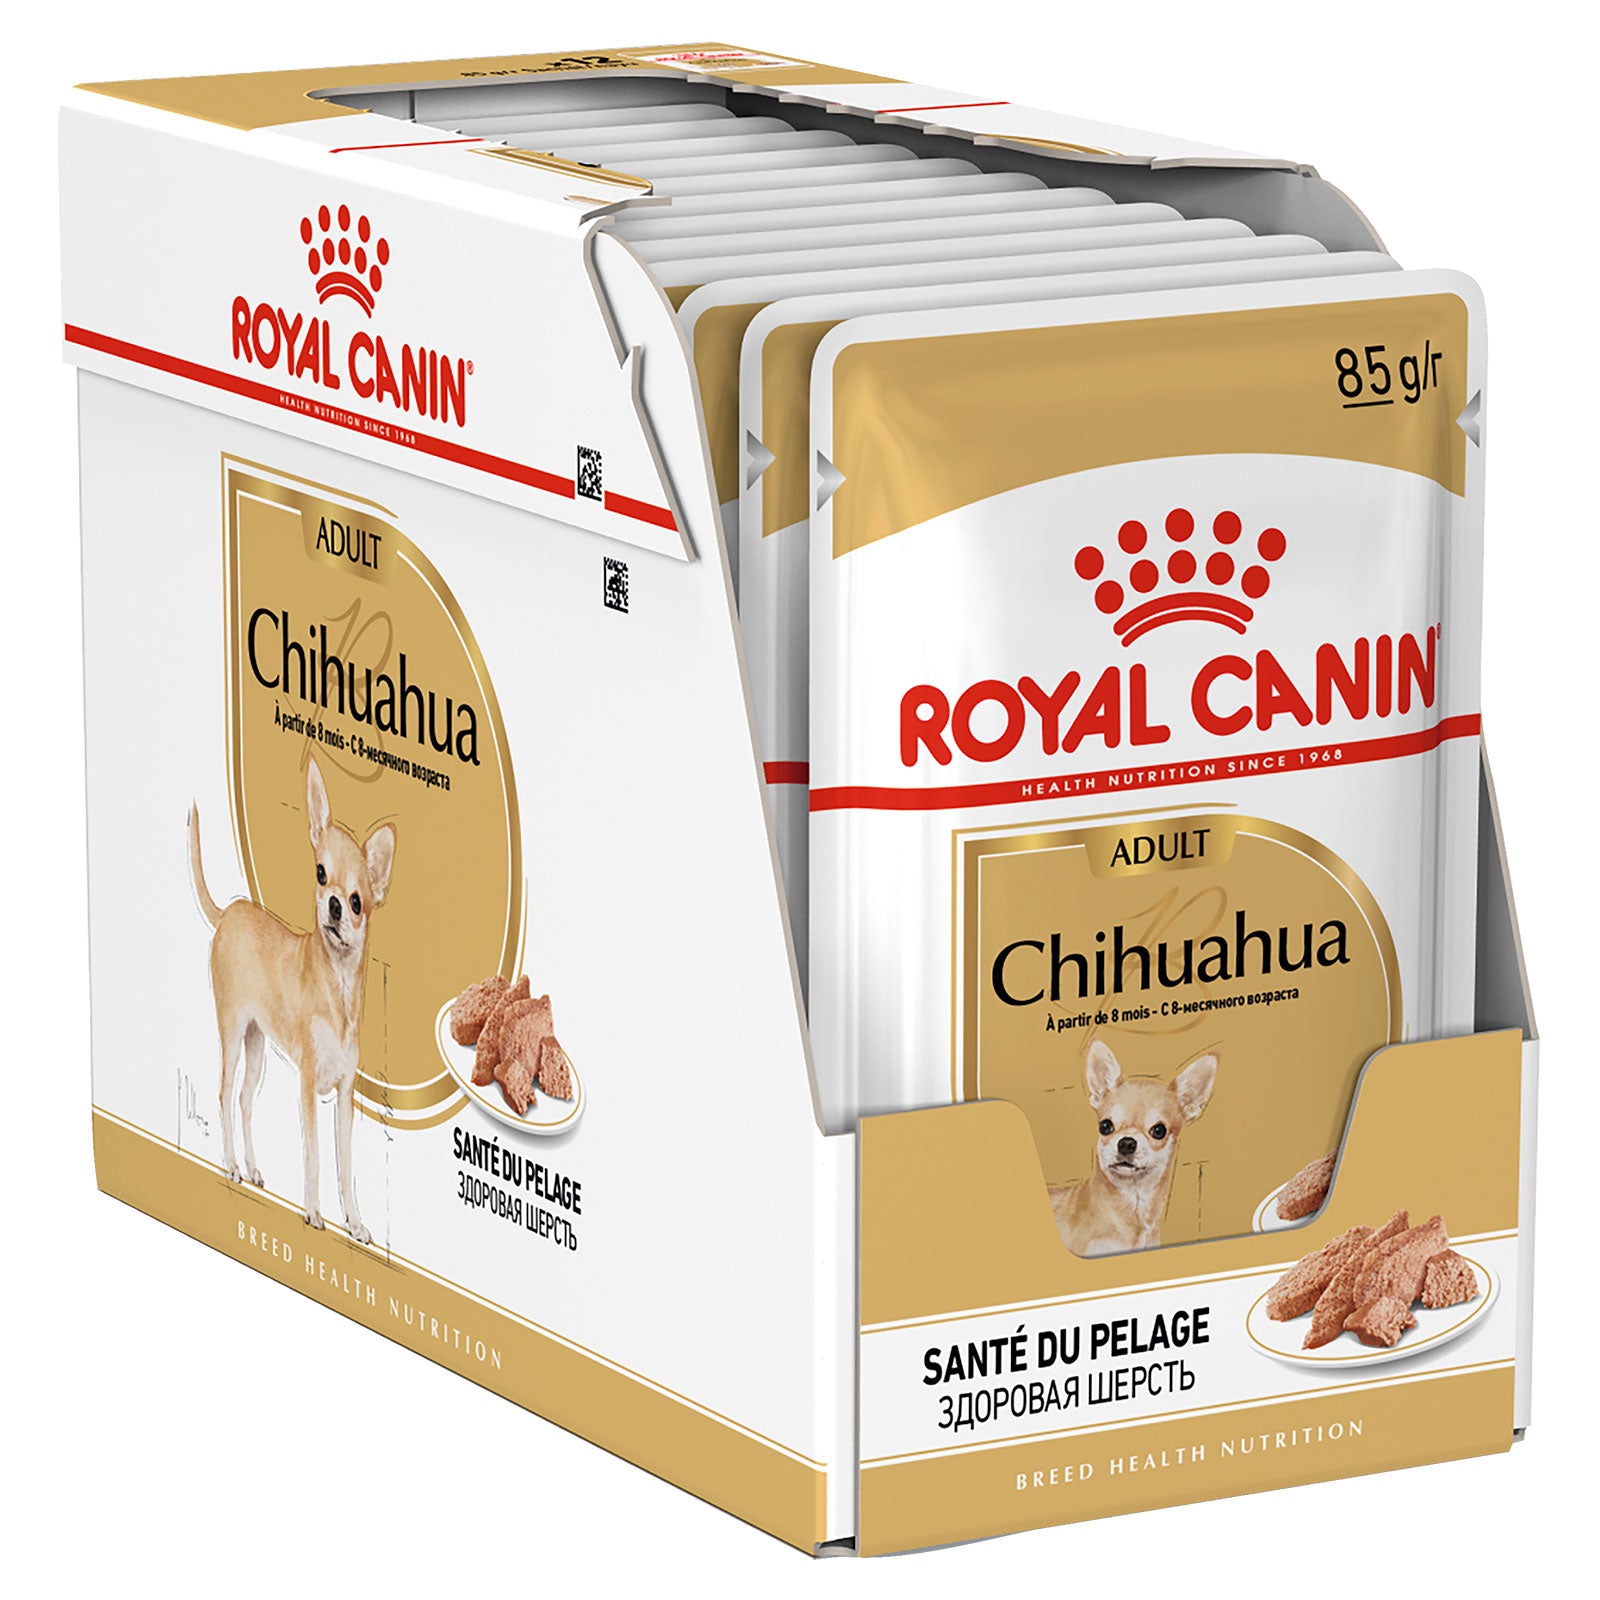 Royal Canin Dog Food Pouch Adult Chihuahua